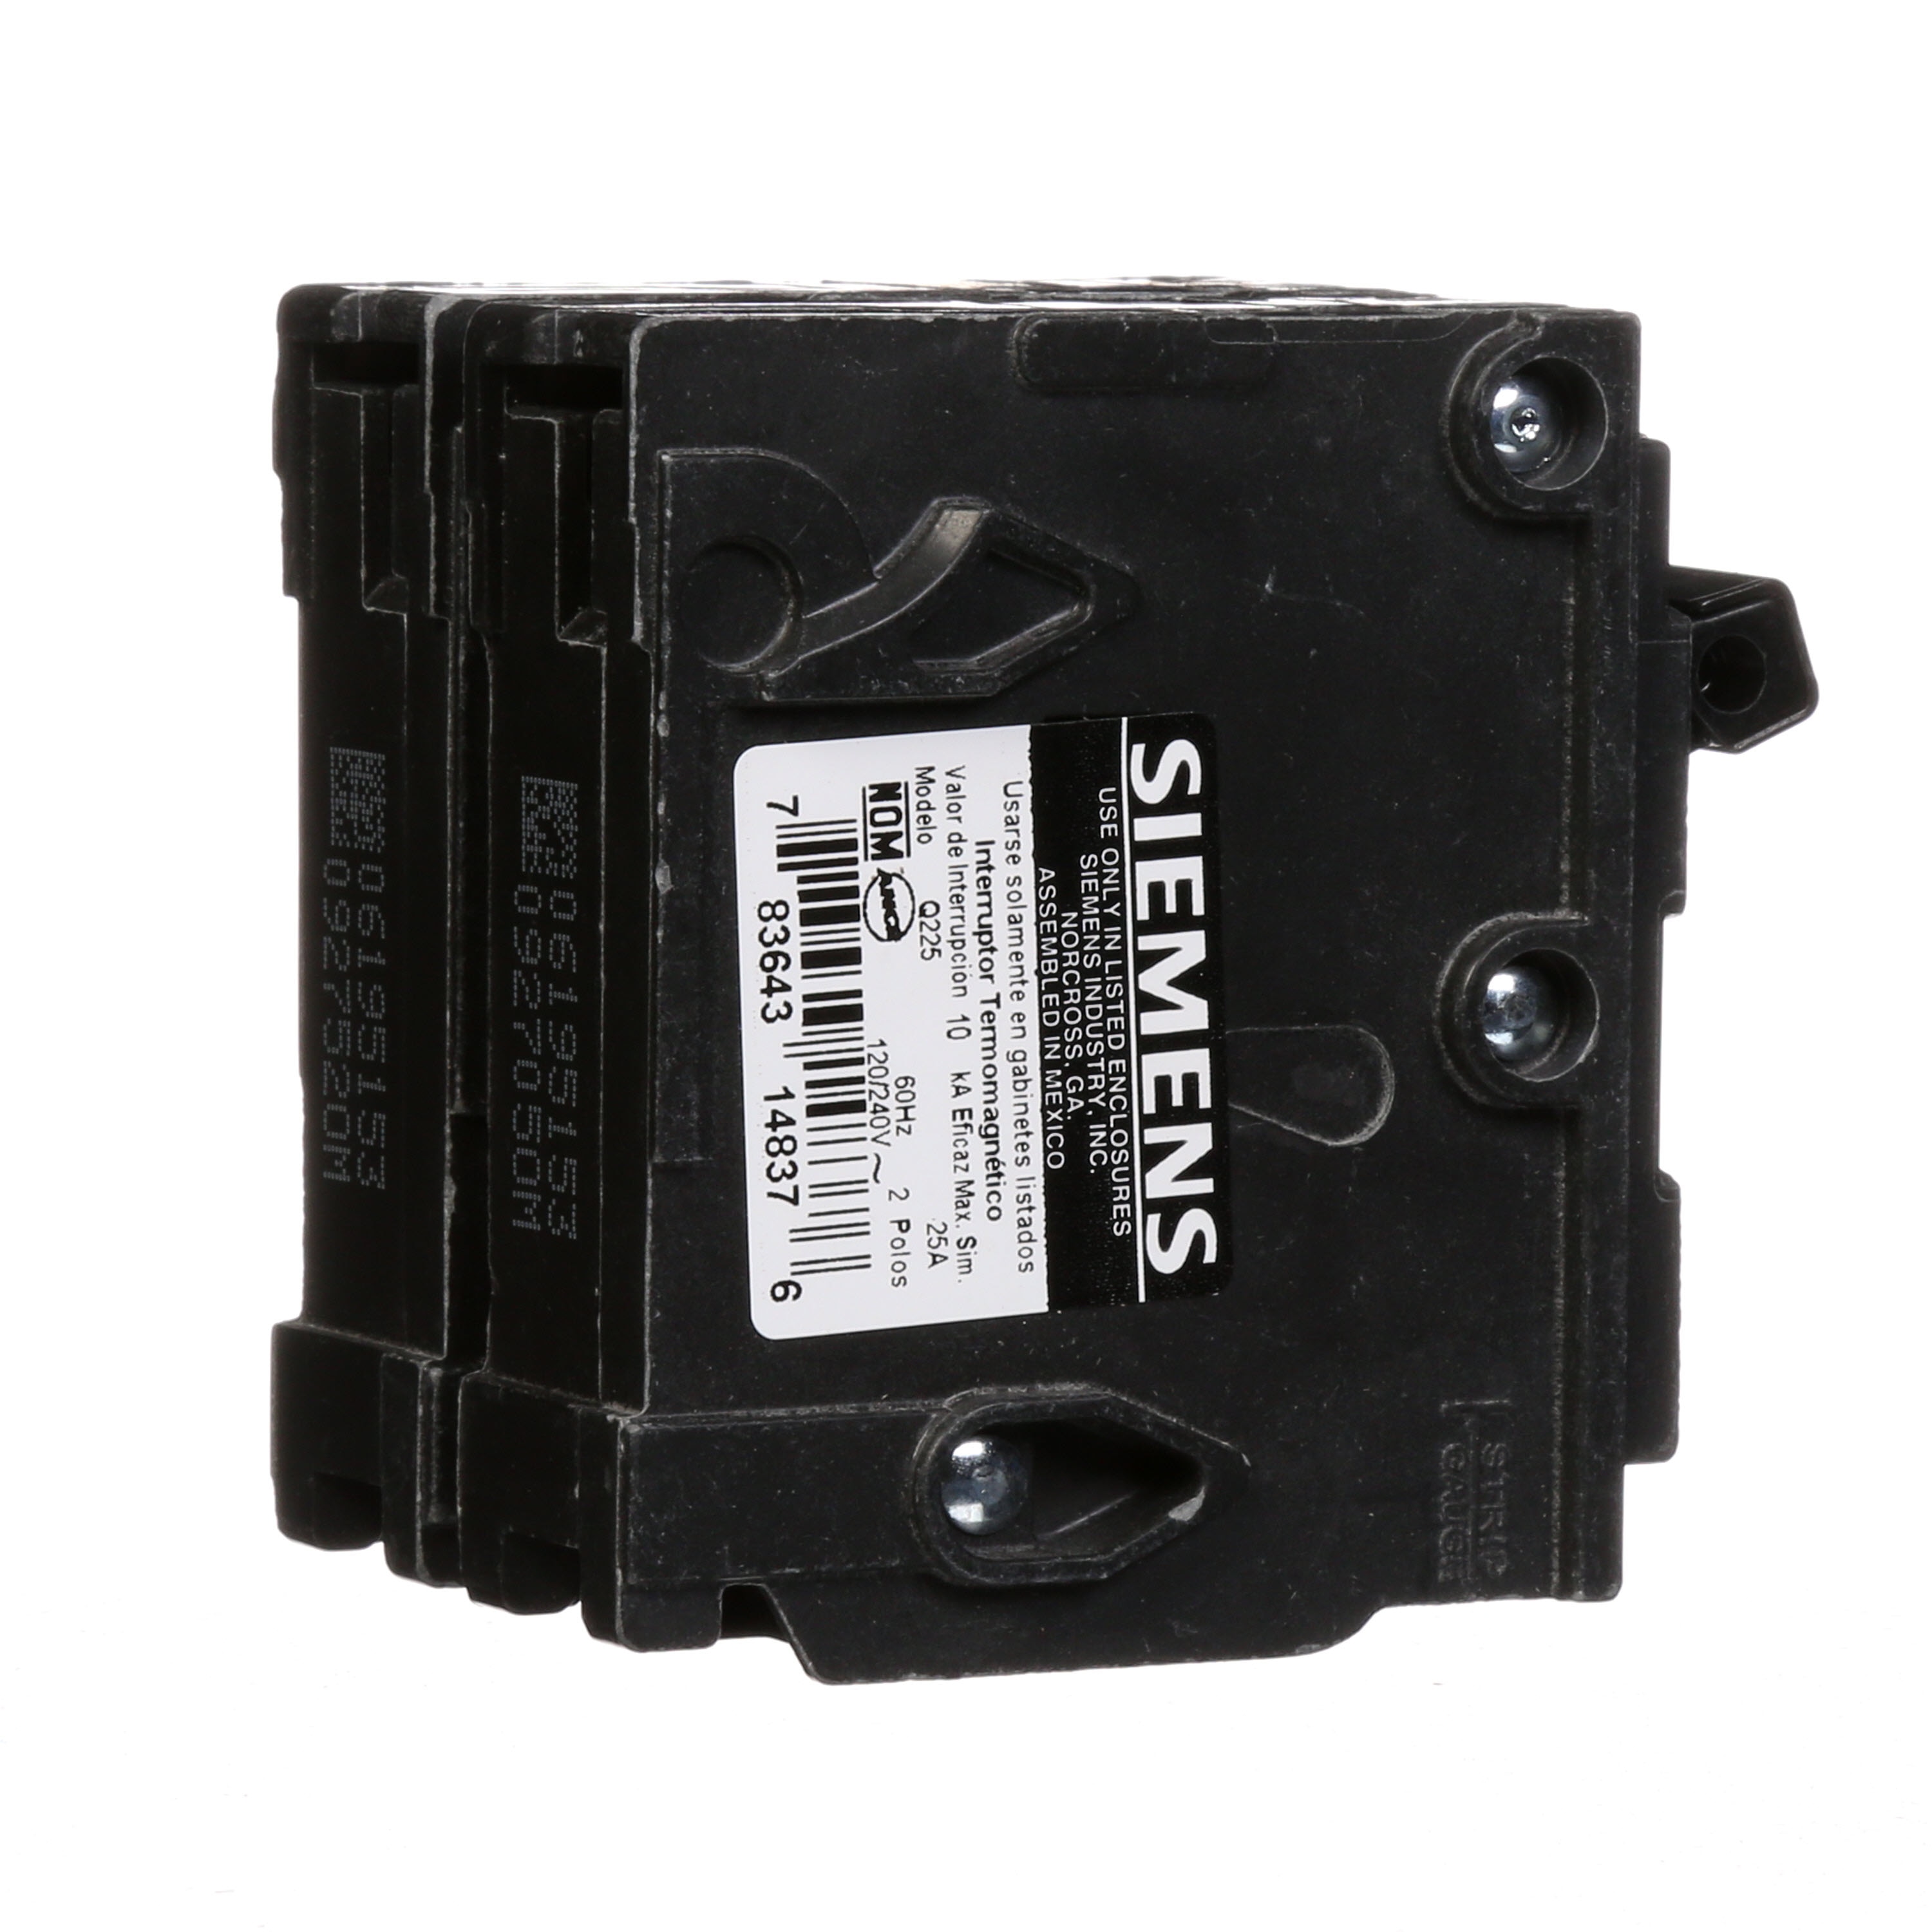 CHIPPED *NEW NO BOX* Details about   SIEMENS Q125 CIRCUIT BREAKER 25A 